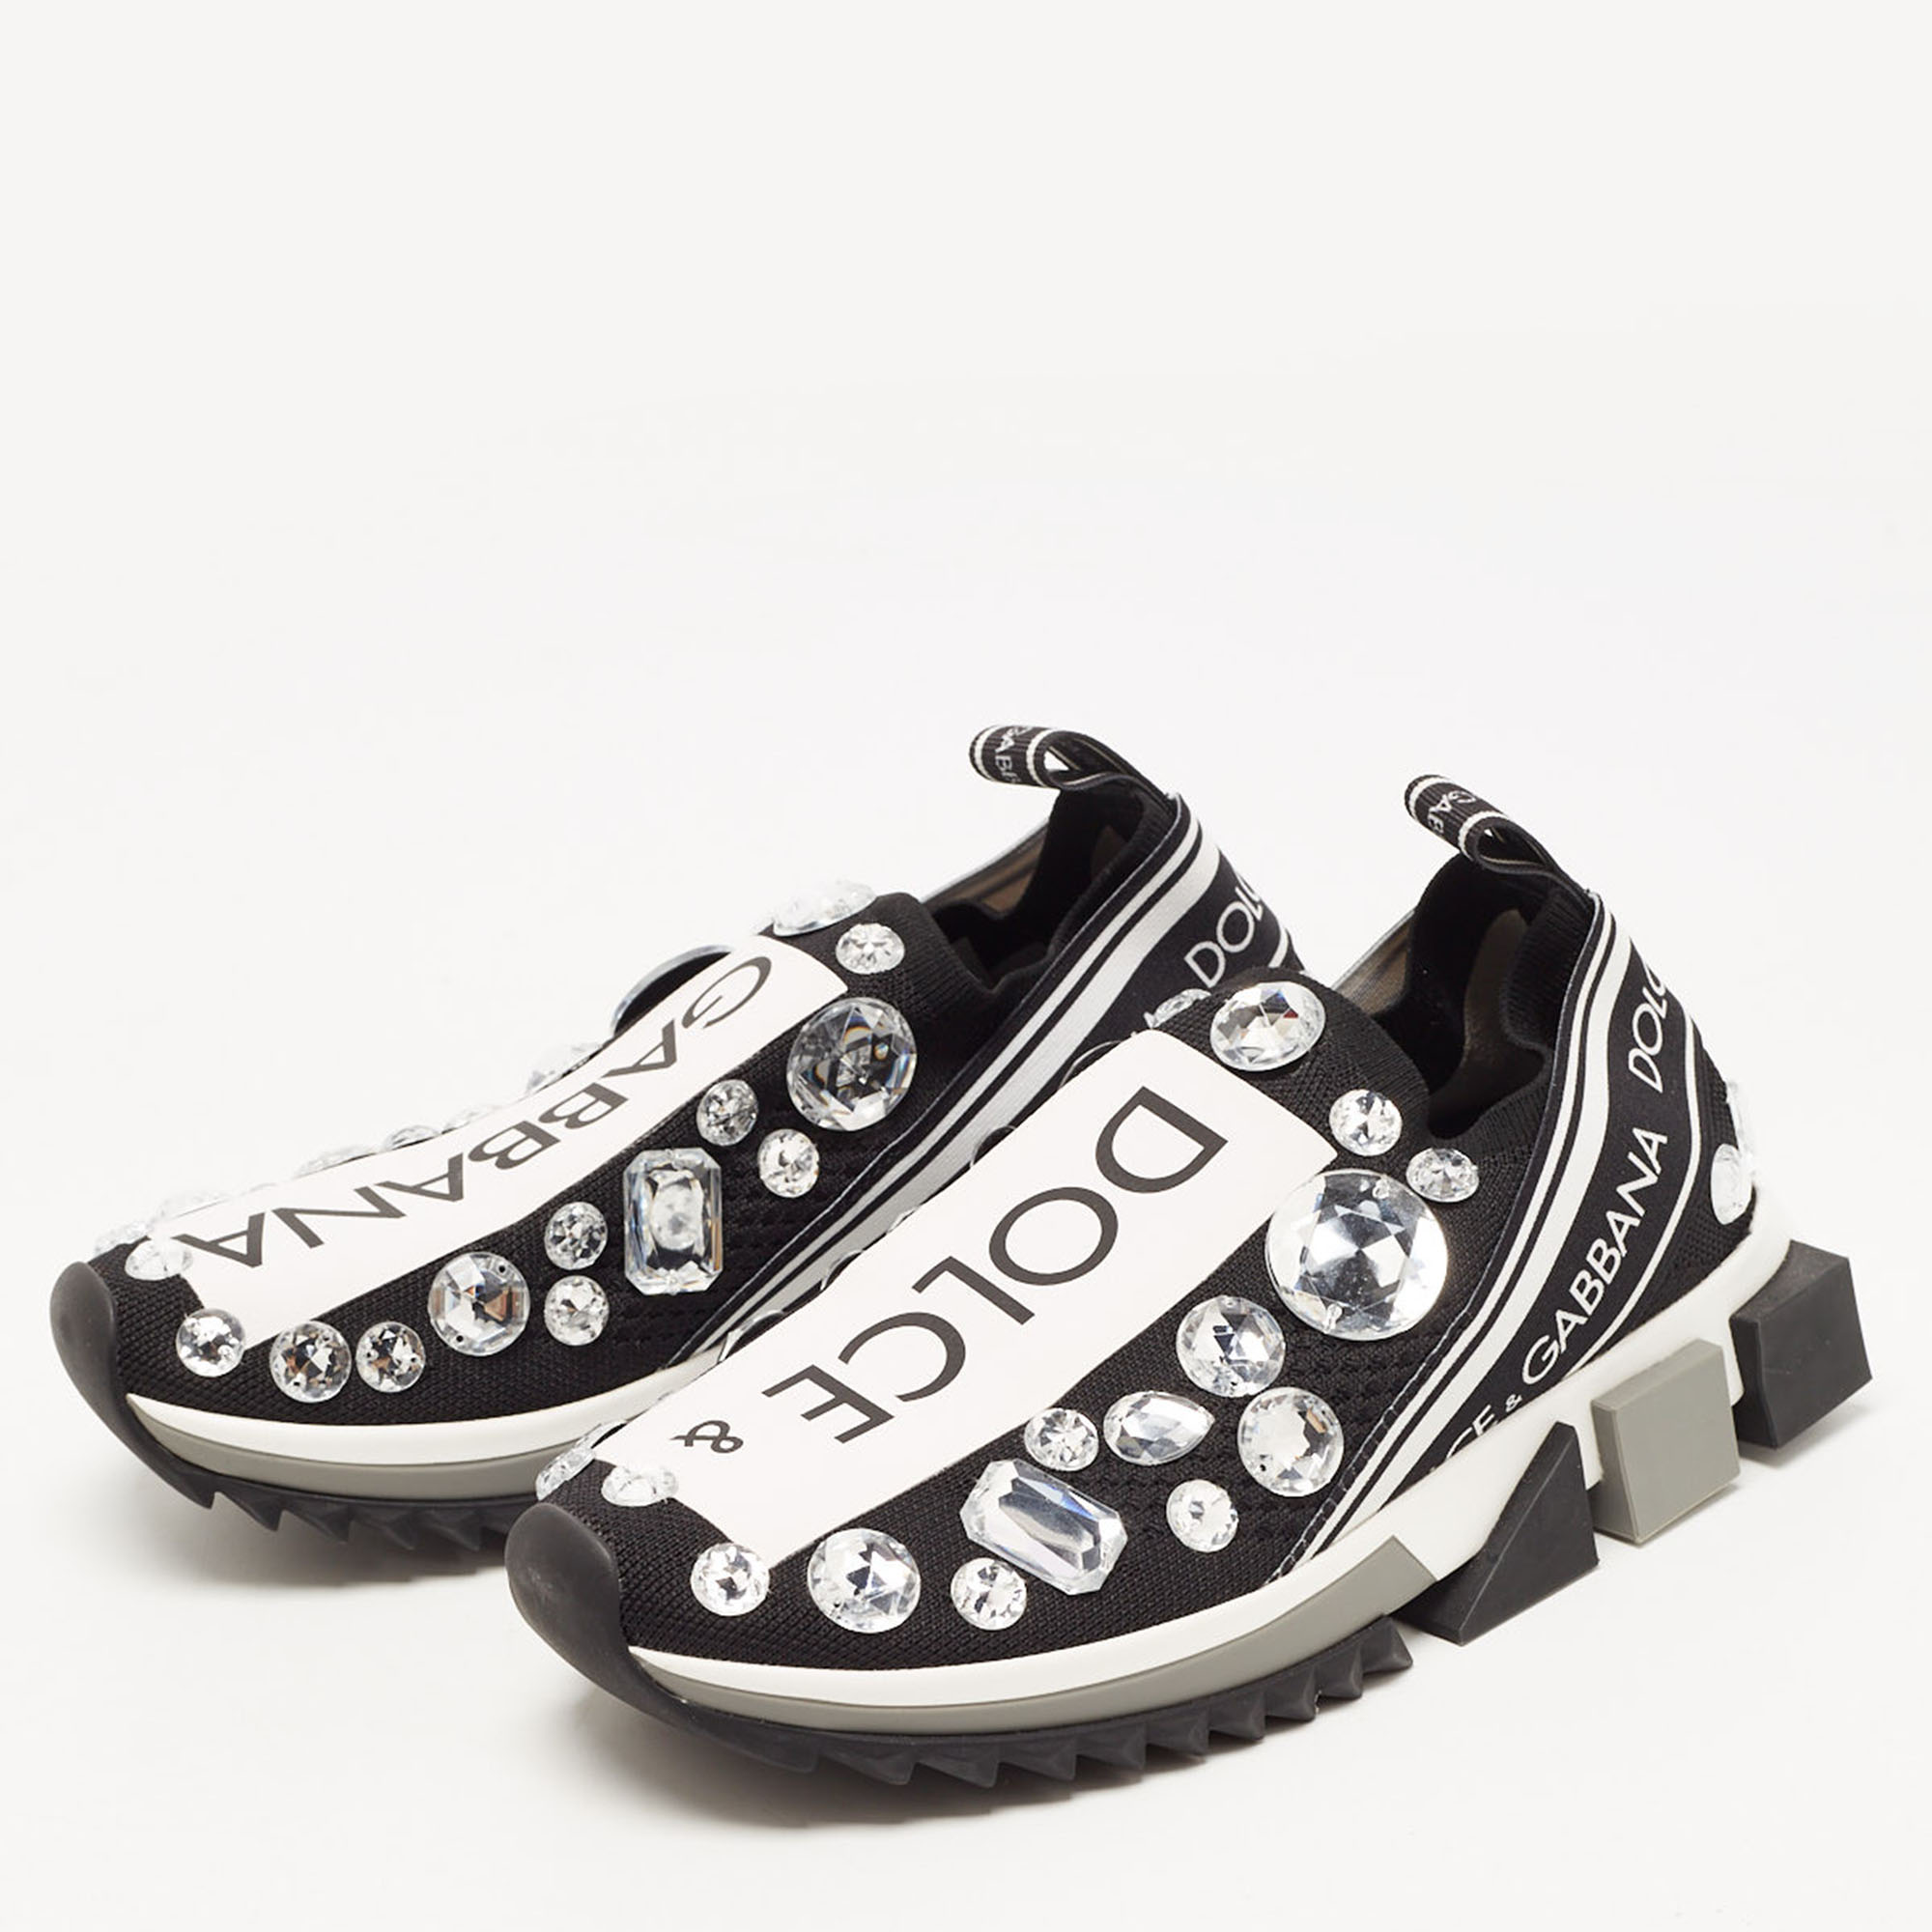 

Dolce & Gabbana Black/White Knit Fabric Sorrento Crystals Sneakers Size